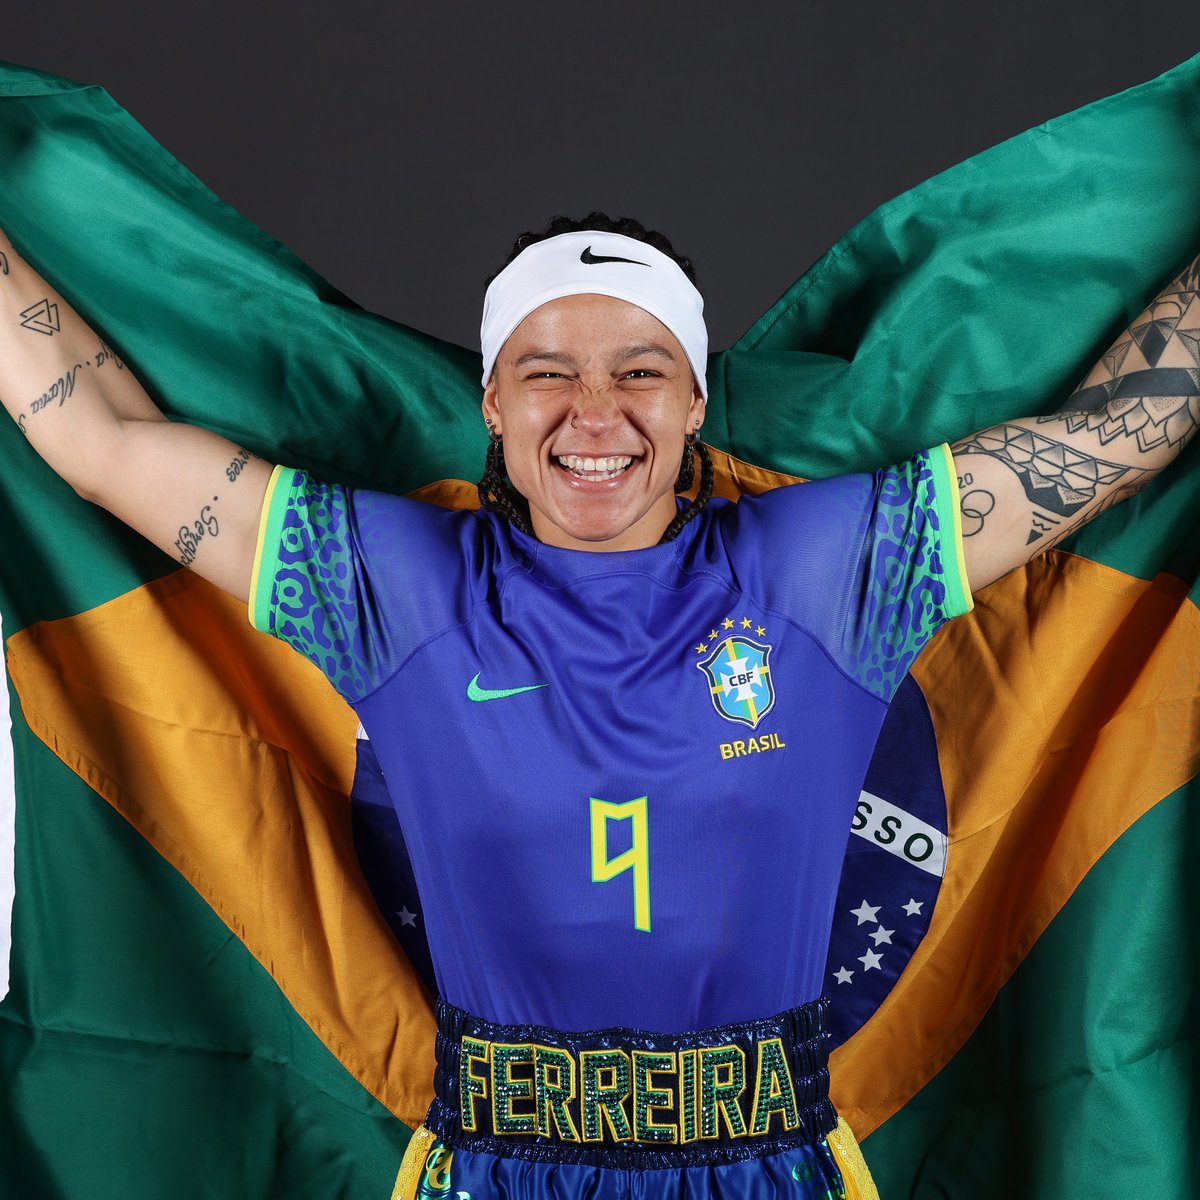 𝗧𝗵𝗲 𝗕𝗲𝗮𝘀𝘁 𝗙𝗿𝗼𝗺 𝗕𝗿𝗮𝘇𝗶𝗹 🇧🇷🧨 @BFerreira60kg aiming to become a World Champion in just her fifth pro fight 😮‍💨 #FerreiraLescano | Apr 27 | 📍 Liverpool